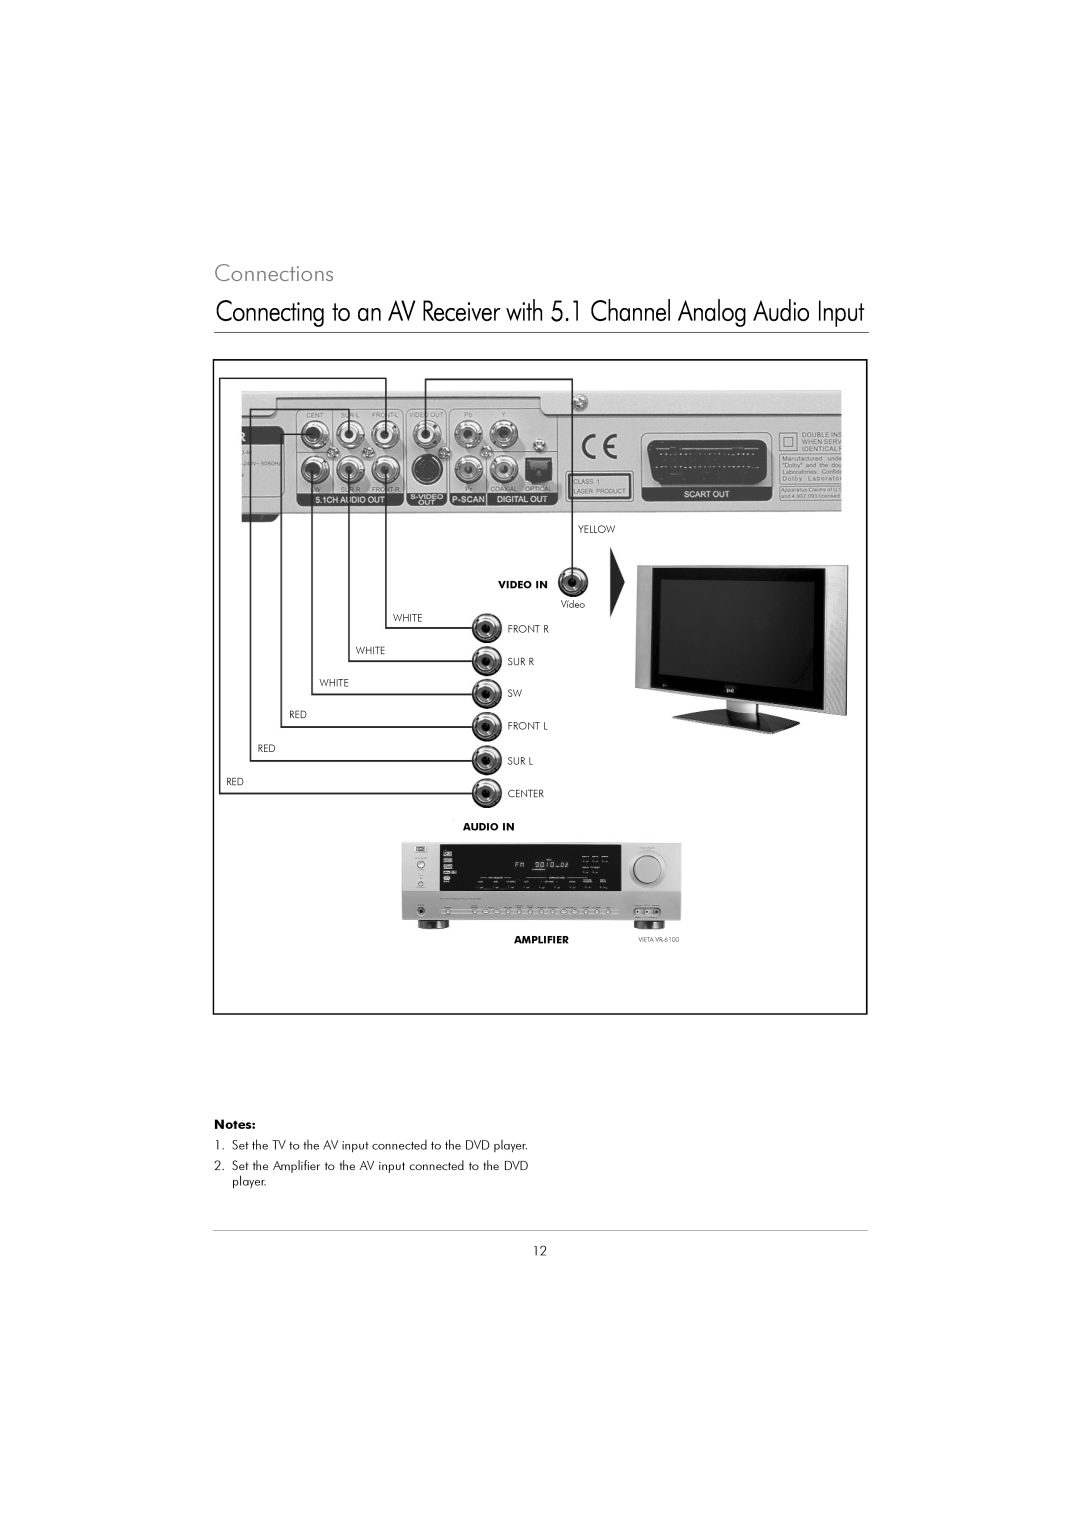 Kodak DVD 40 user manual Connecting to an AV Receiver with 5.1 Channel Analog Audio Input, Connections, Video In, Amplifier 